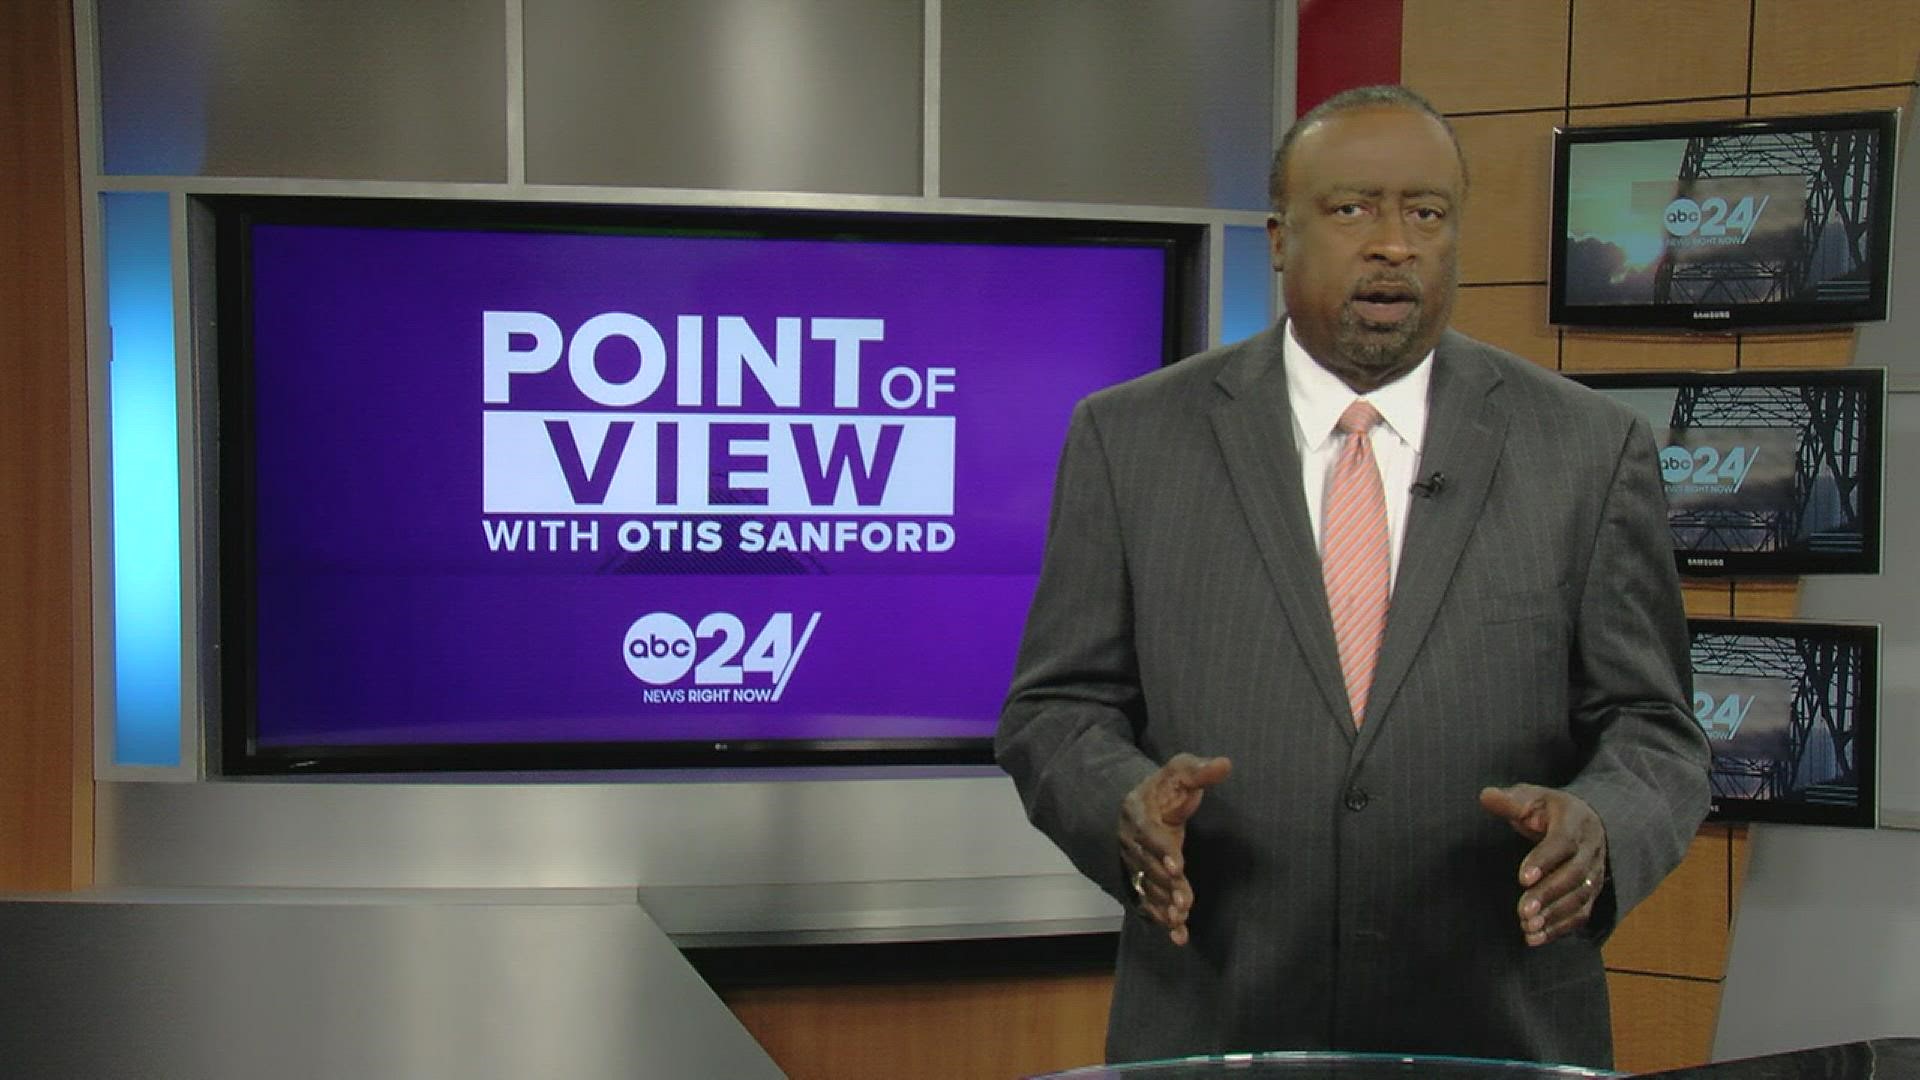 ABC 24 political analyst and commentator Otis Sanford shared his point of view on a Shelby County election controversy.